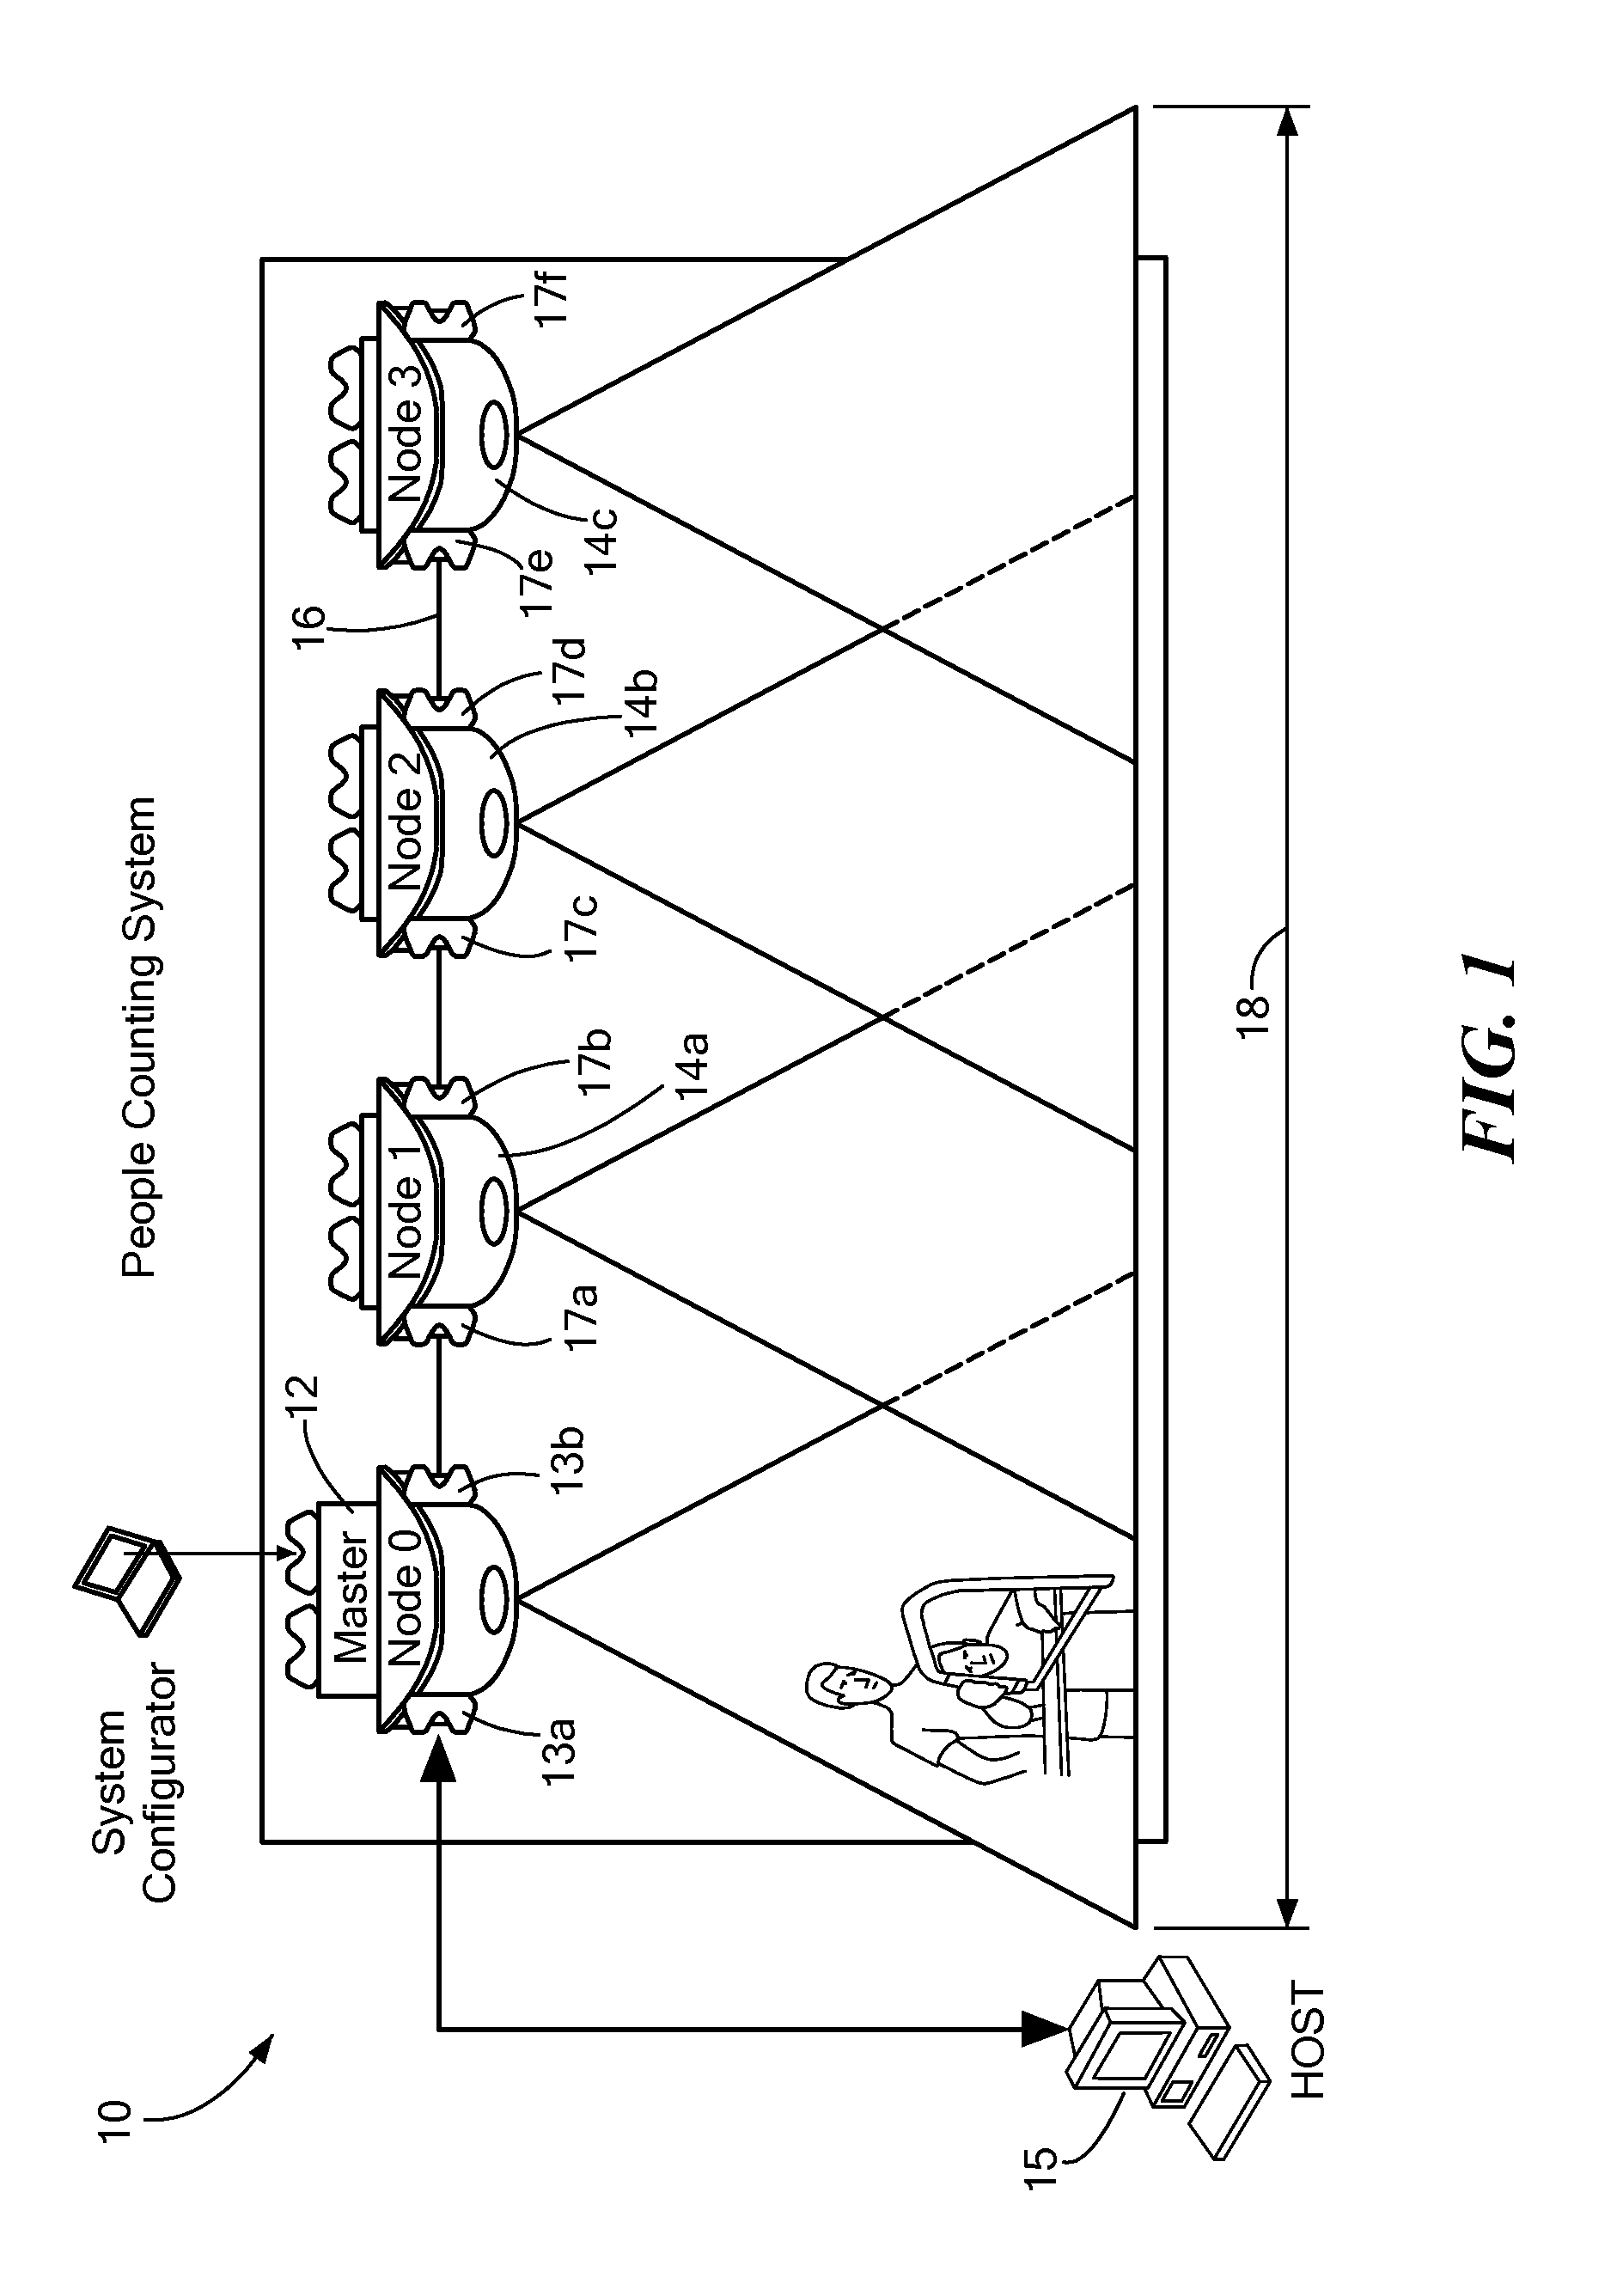 System and method for automatic configuration of master/slave devices on a network